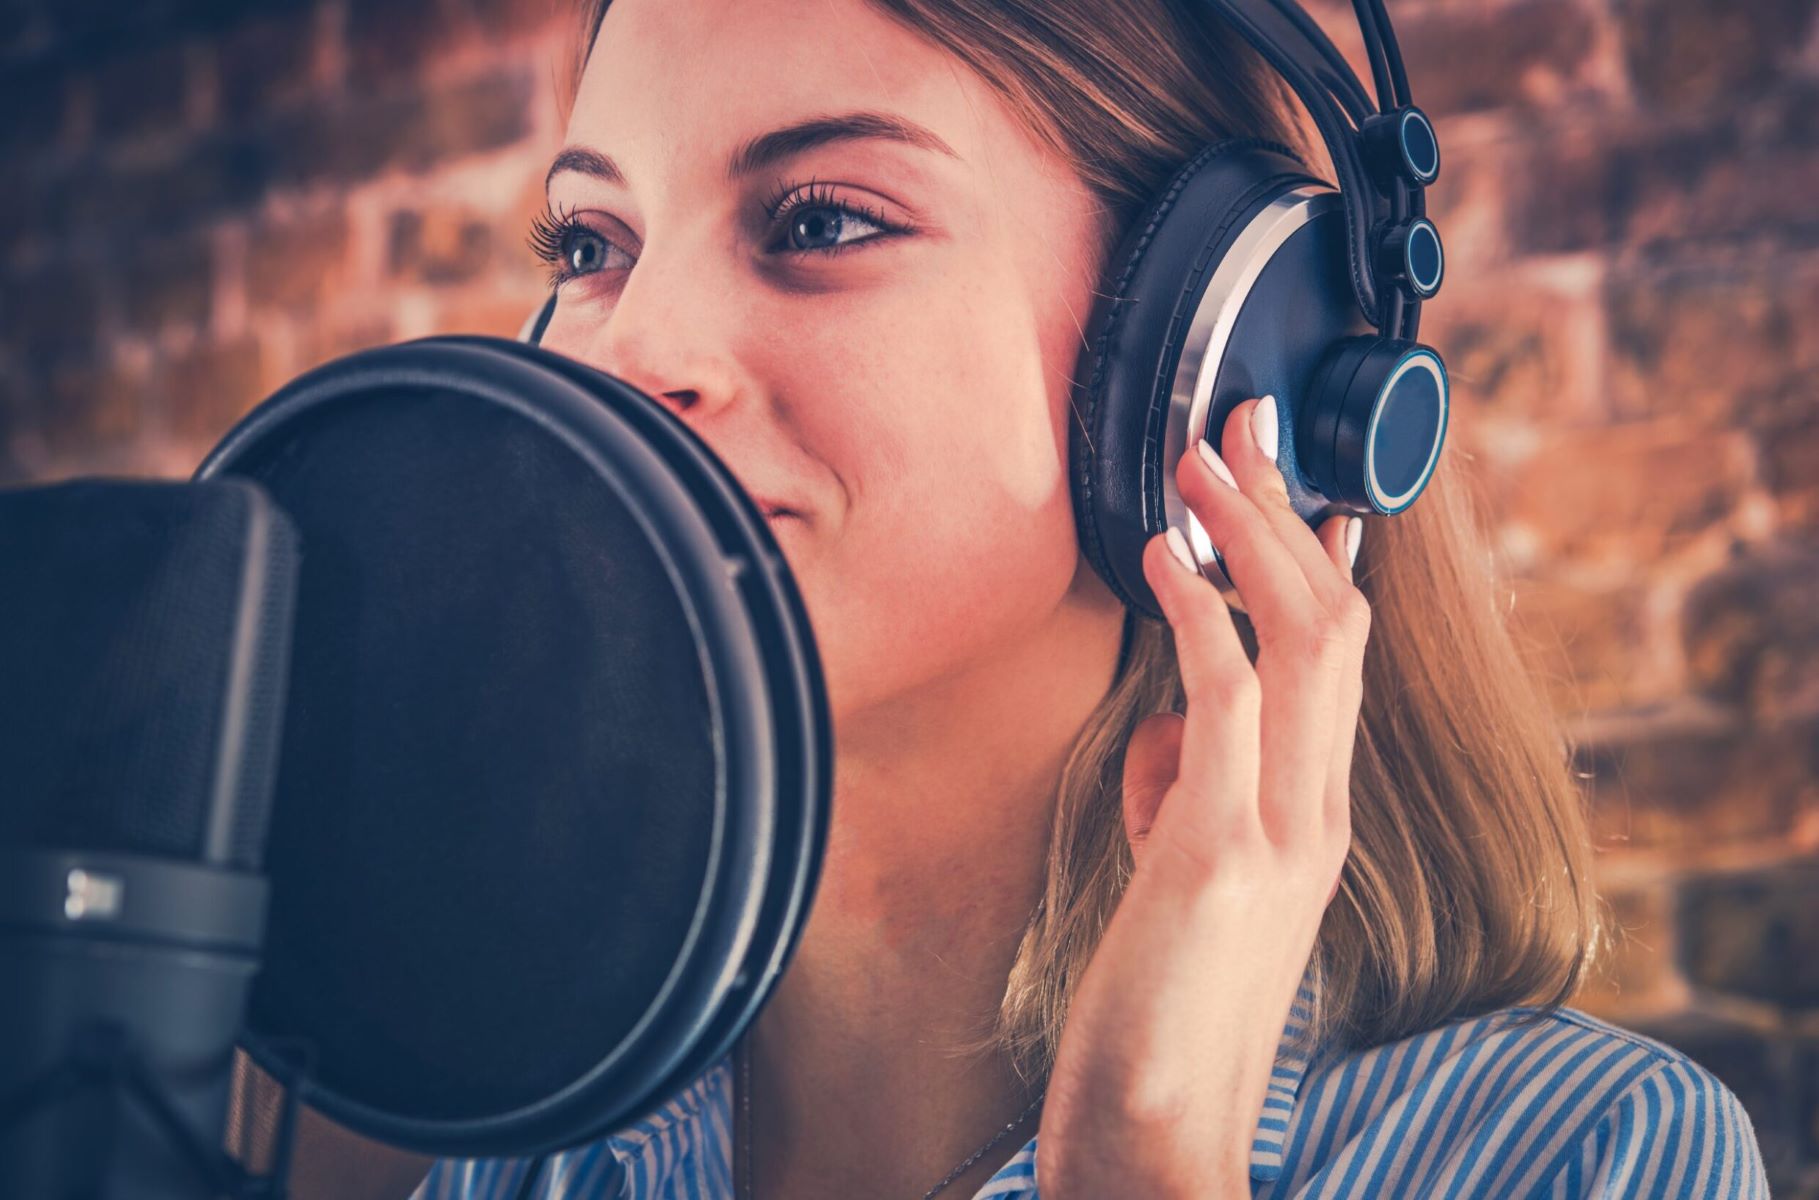 What Makes A Good Audiobook Narrator